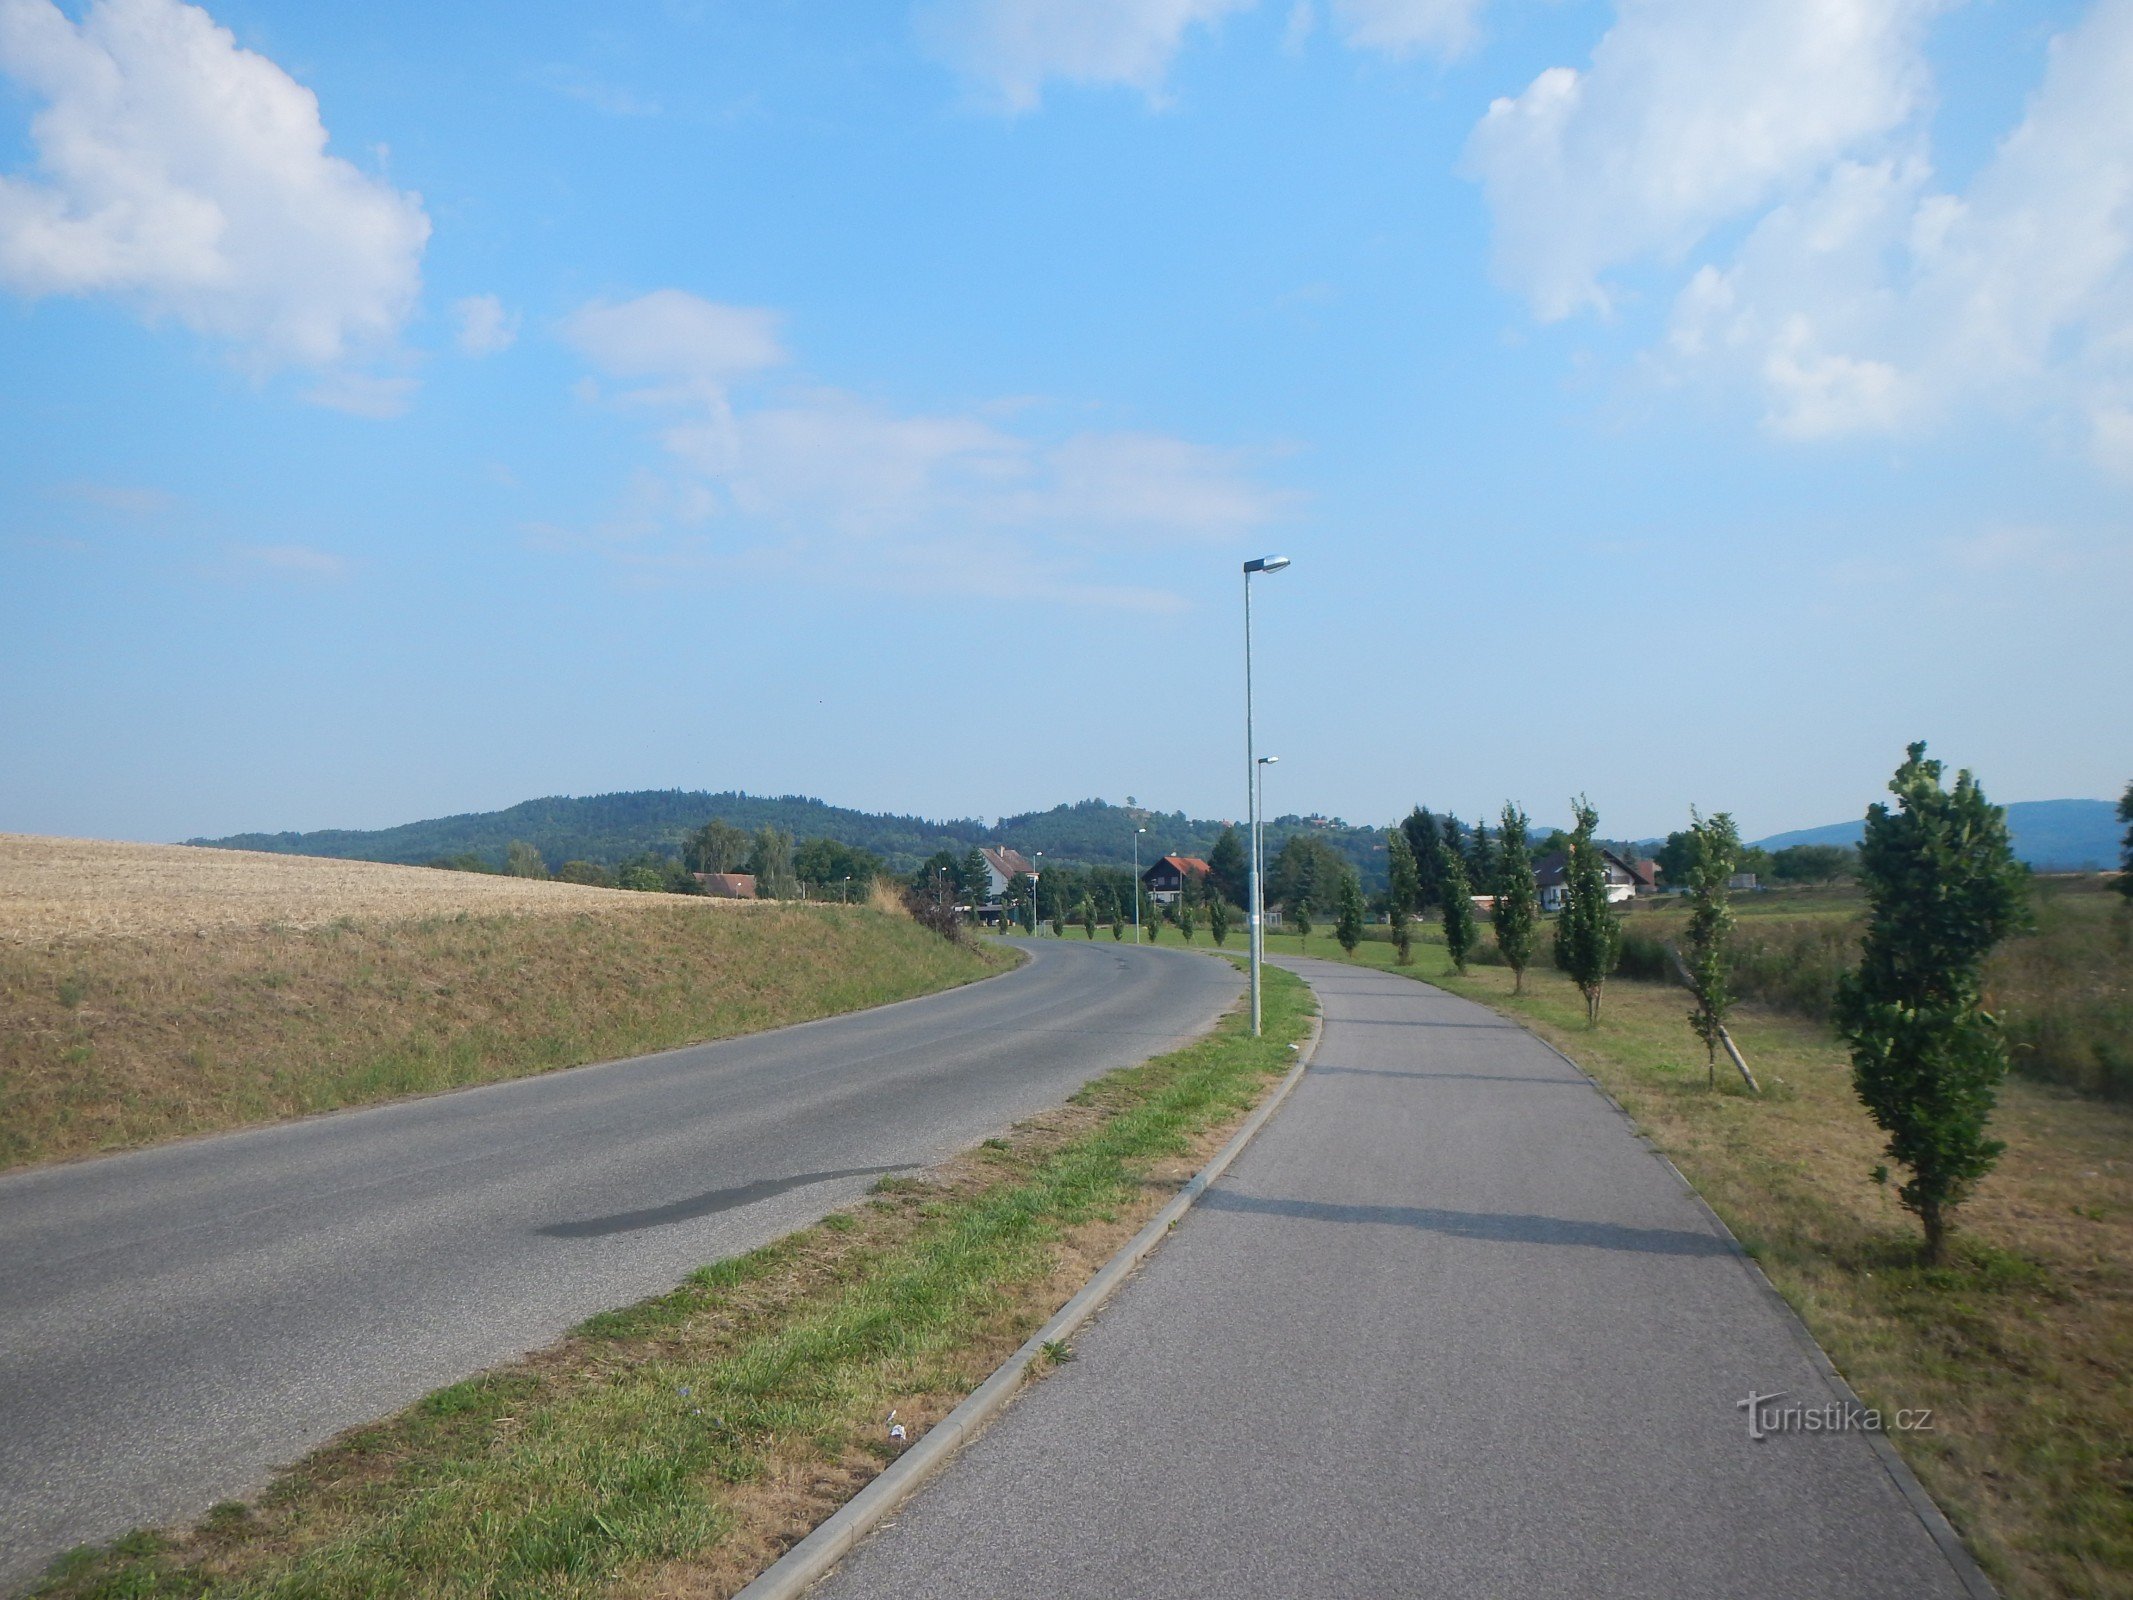 Cycle route No. 14 from Holín to Prachov. In the background the hill Přivýšina and Brada.